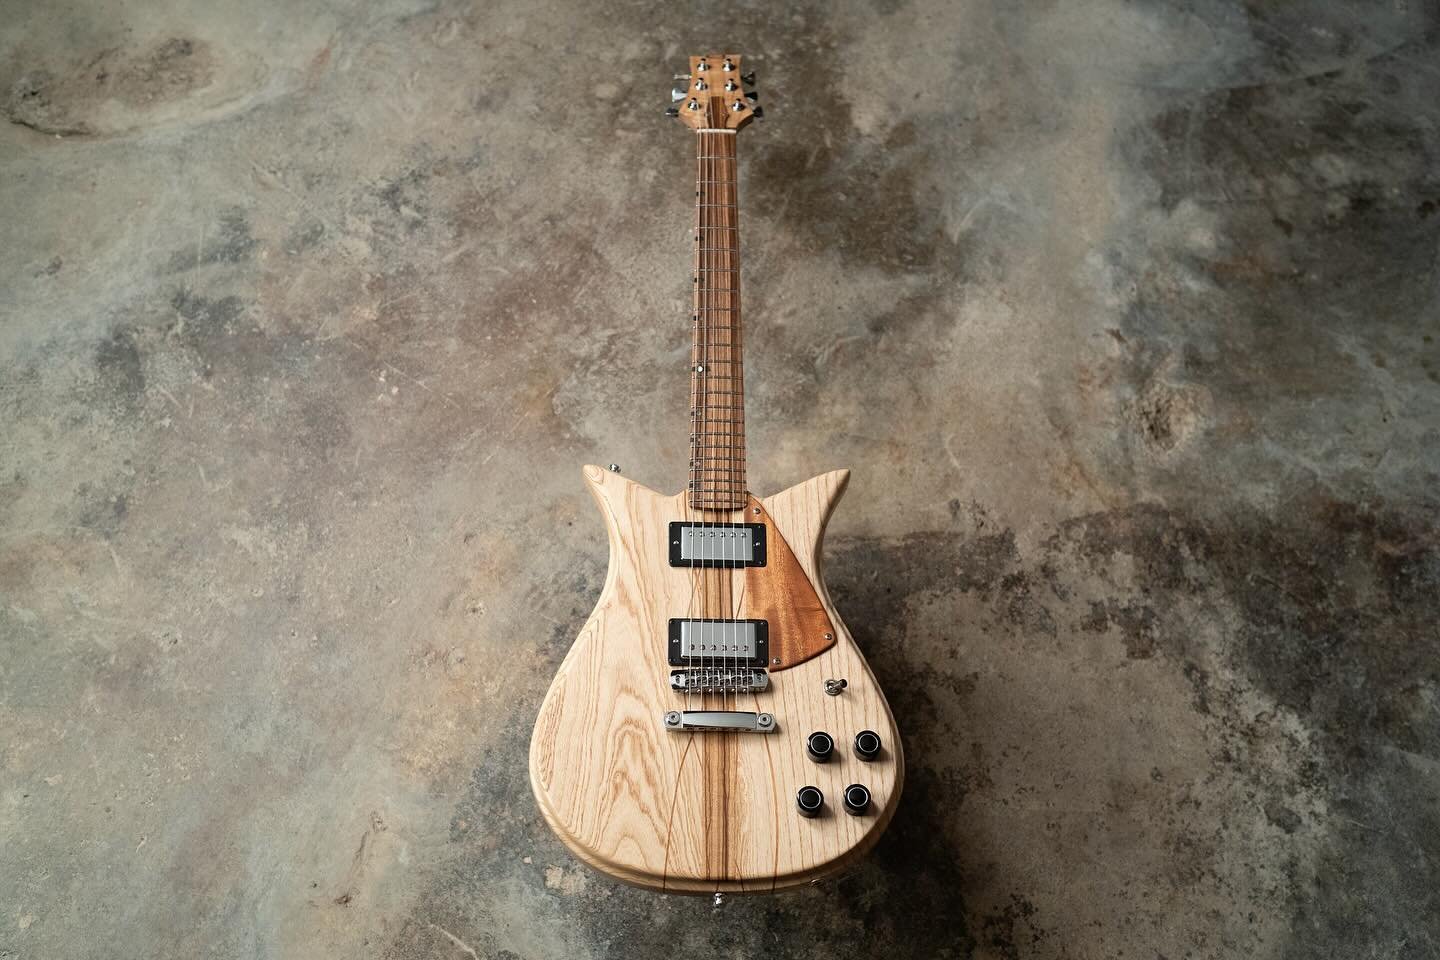 Less than a week left to get in on this raffle!

This guitar is being given away on Monday in celebration of 4 years in business. It also happens to be my 40th birthday. This platform is really what drives my ability to do this for a living and this 